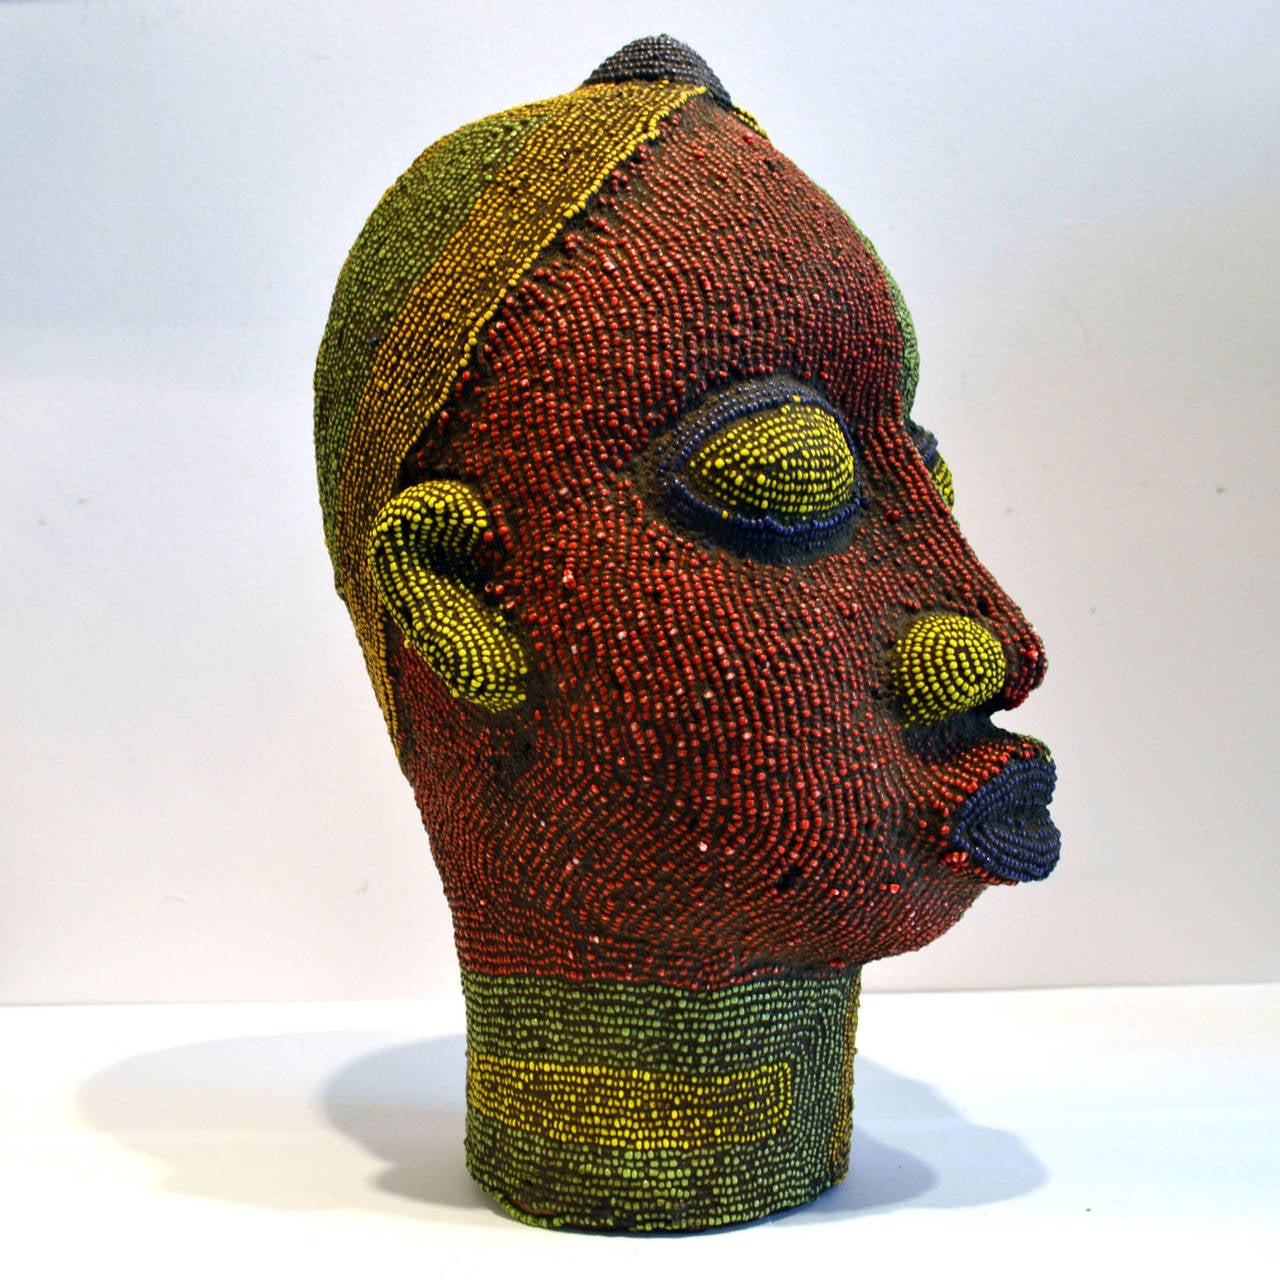 Brightly colored beaded terracotta head commissioned in the 1960s to decorate wealthy Nigerian homes. The terracotta sculpture is inlaid with strings of beads over its ceramic form.
The artist was influenced by 16th century Benin bronze.